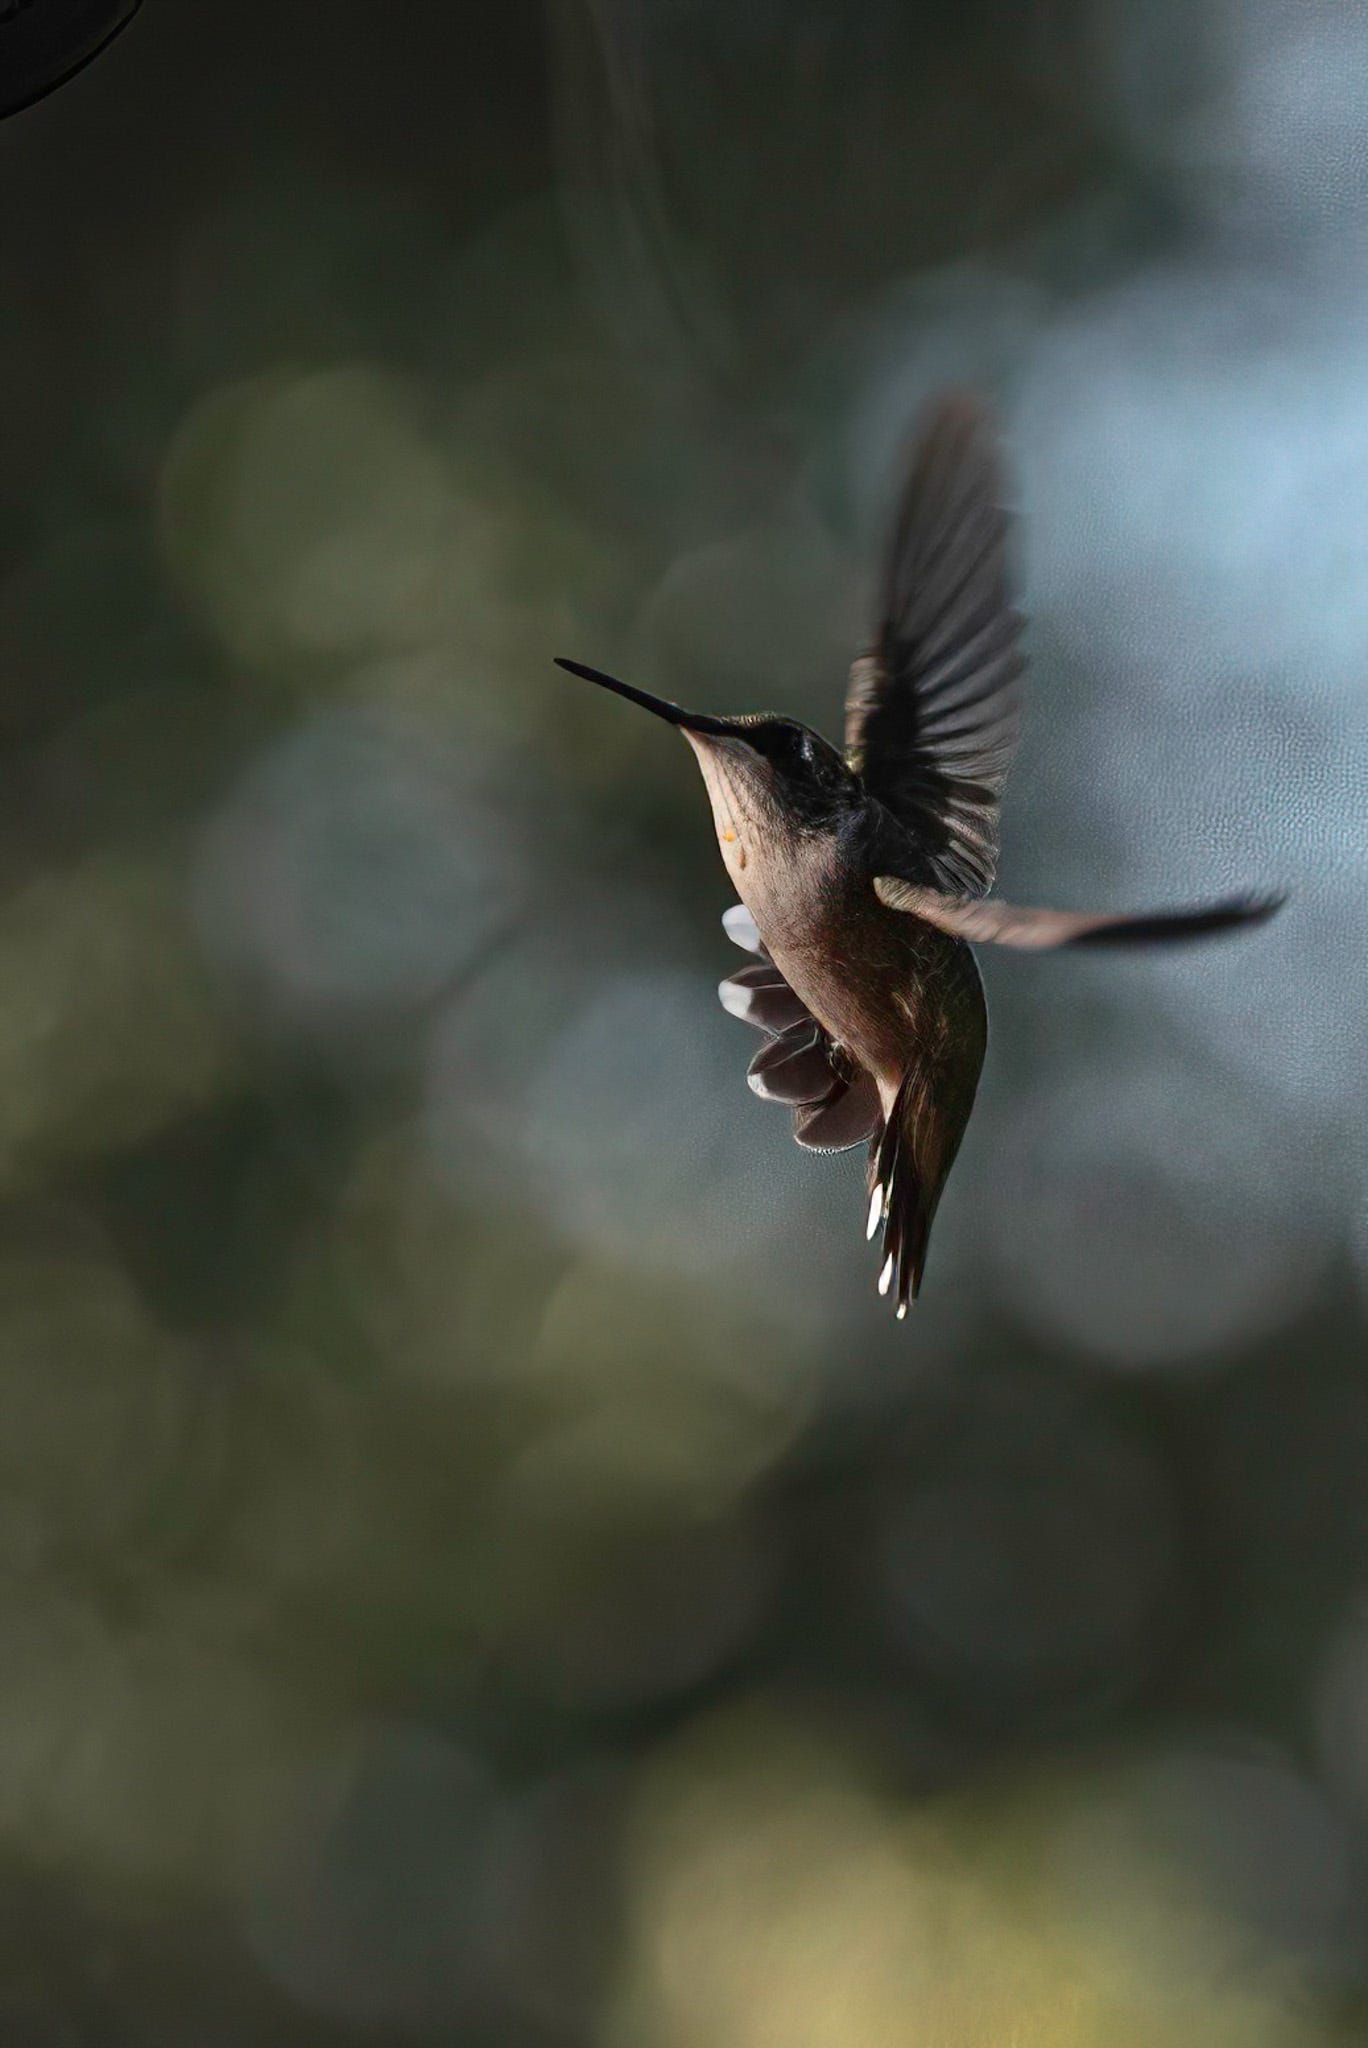 A single hummingbird caught hovering in flight against a blurred and bokeh background